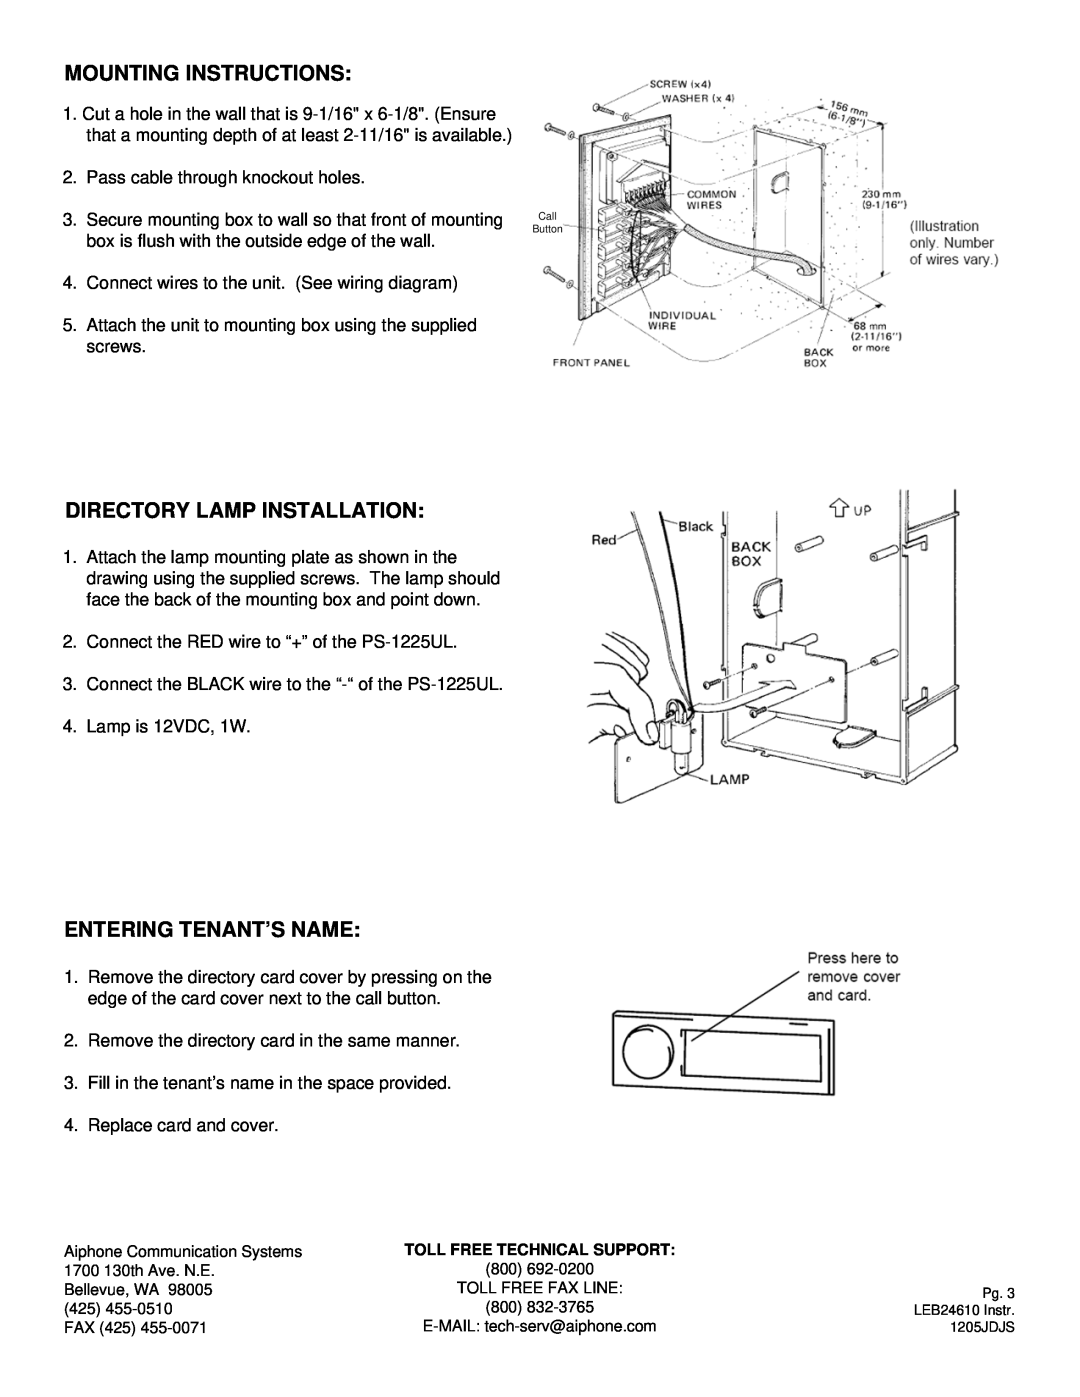 Aiphone LE-B4, LE-B2, LE-B6, LE-B10 dimensions Mounting Instructions, Directory Lamp Installation, Entering Tenant’S Name 